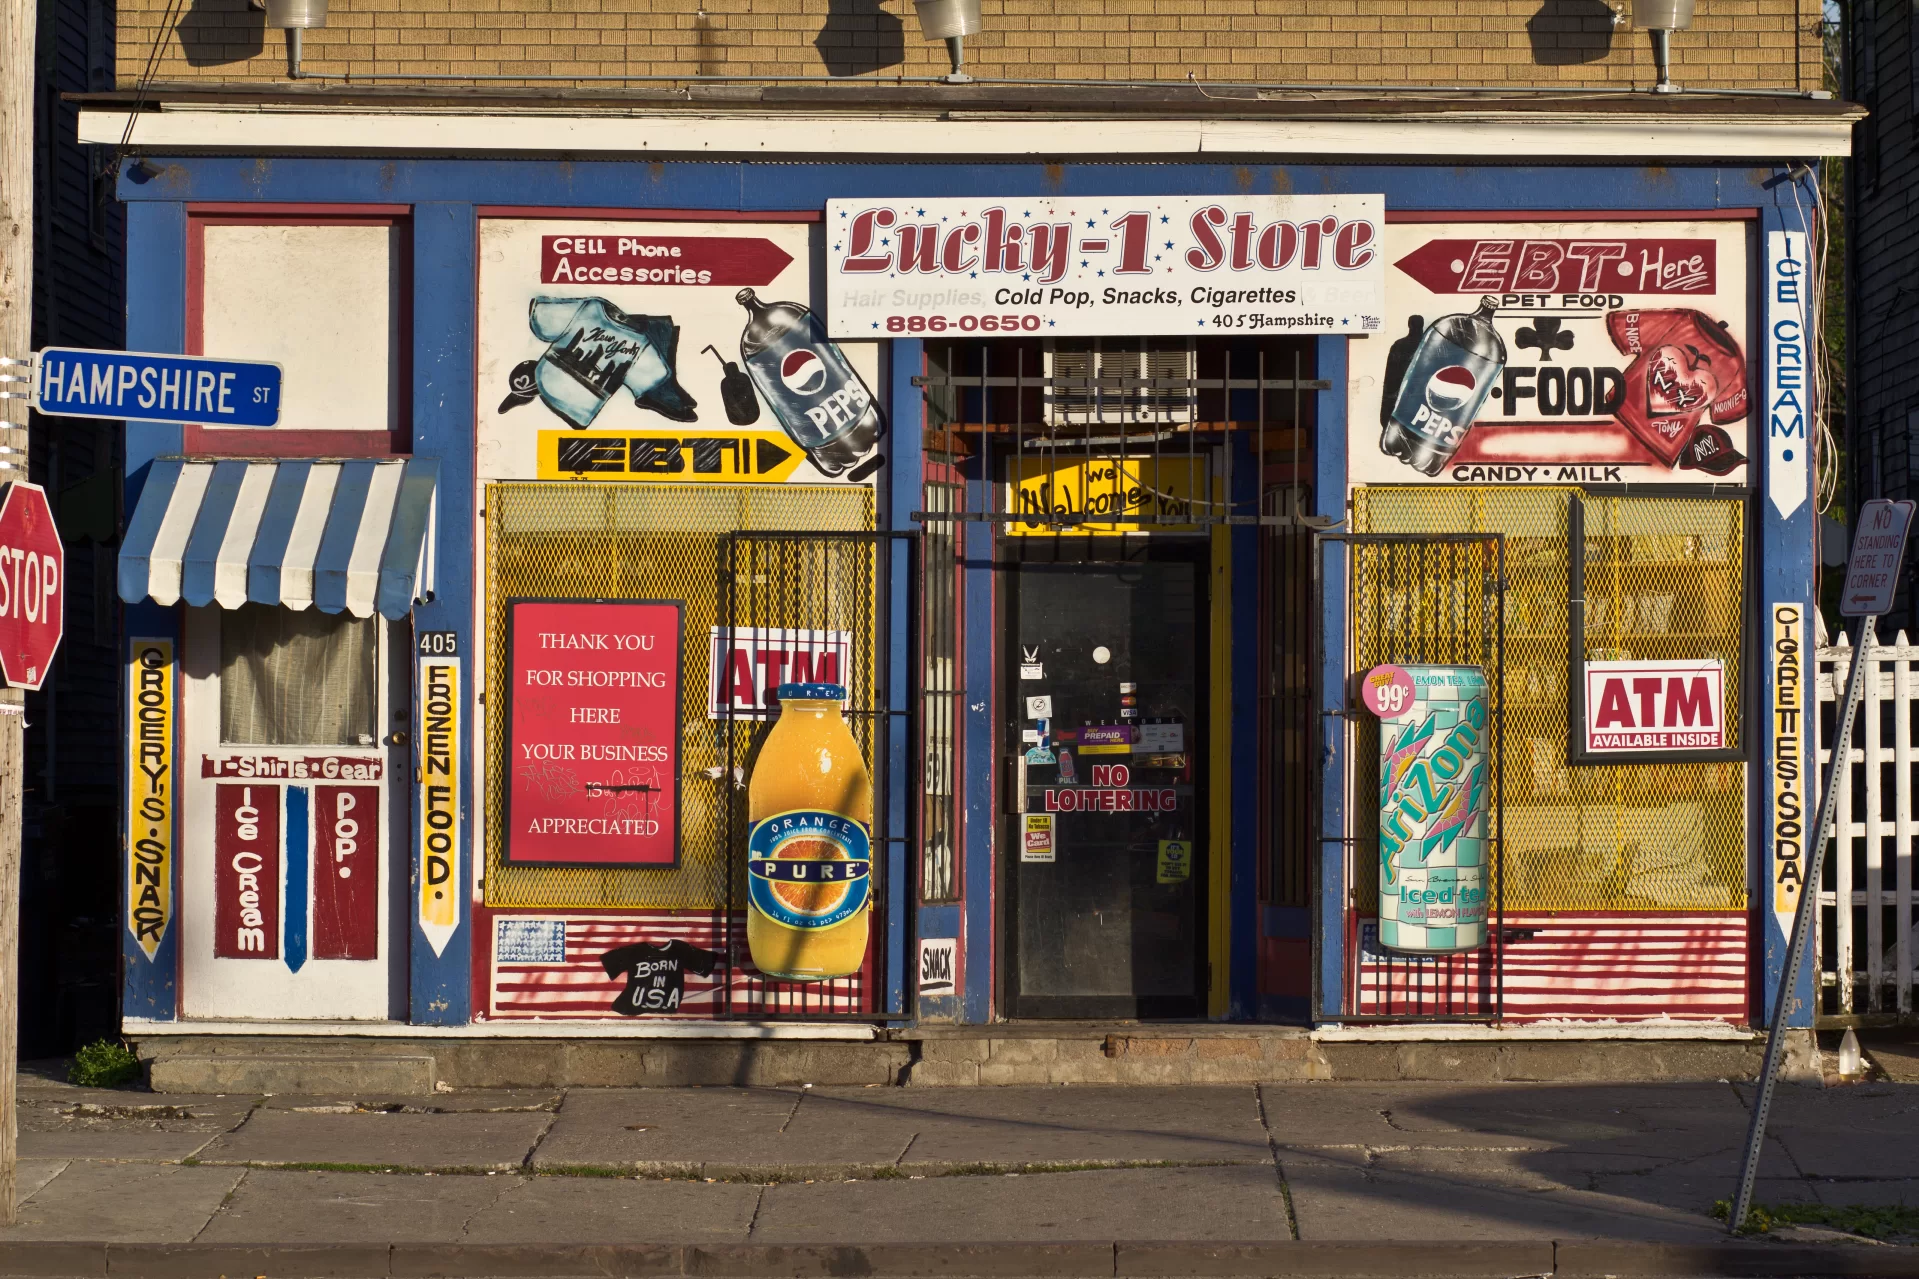 Convenience store in Buffalo, N.Y. Photo by Jonathan Filberthttps://creativecommons.org/licenses/by-nc/2.0/